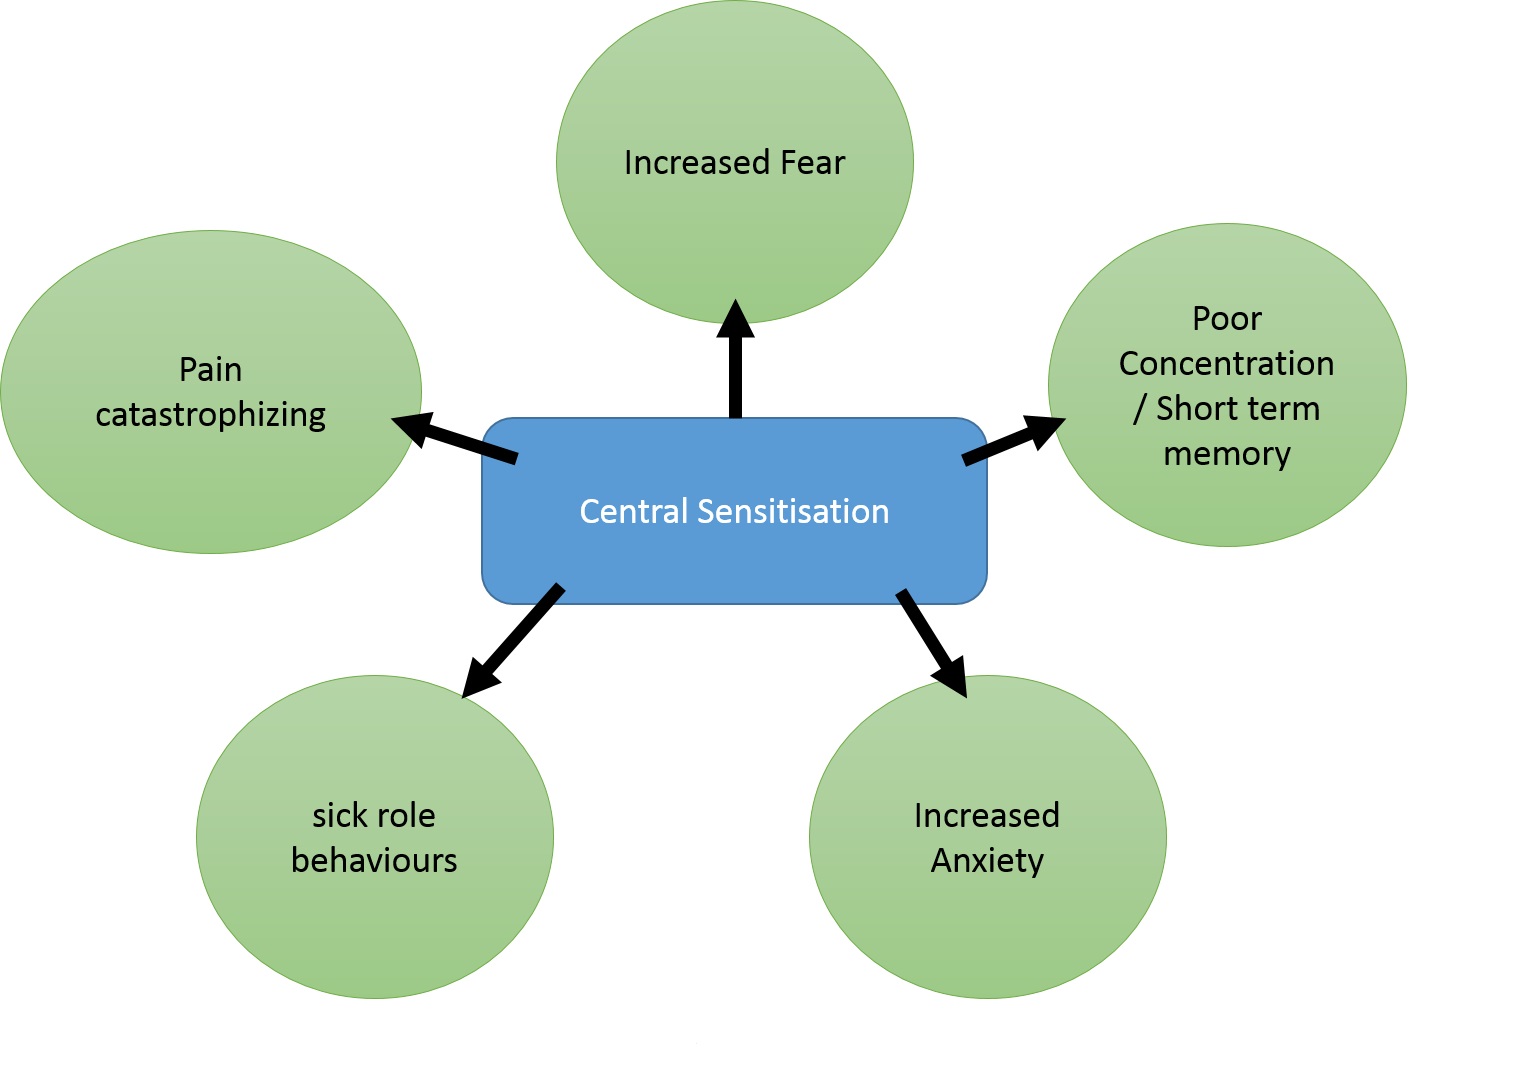 Systemic effects of Central Sensitisation (McAllister, 2012)